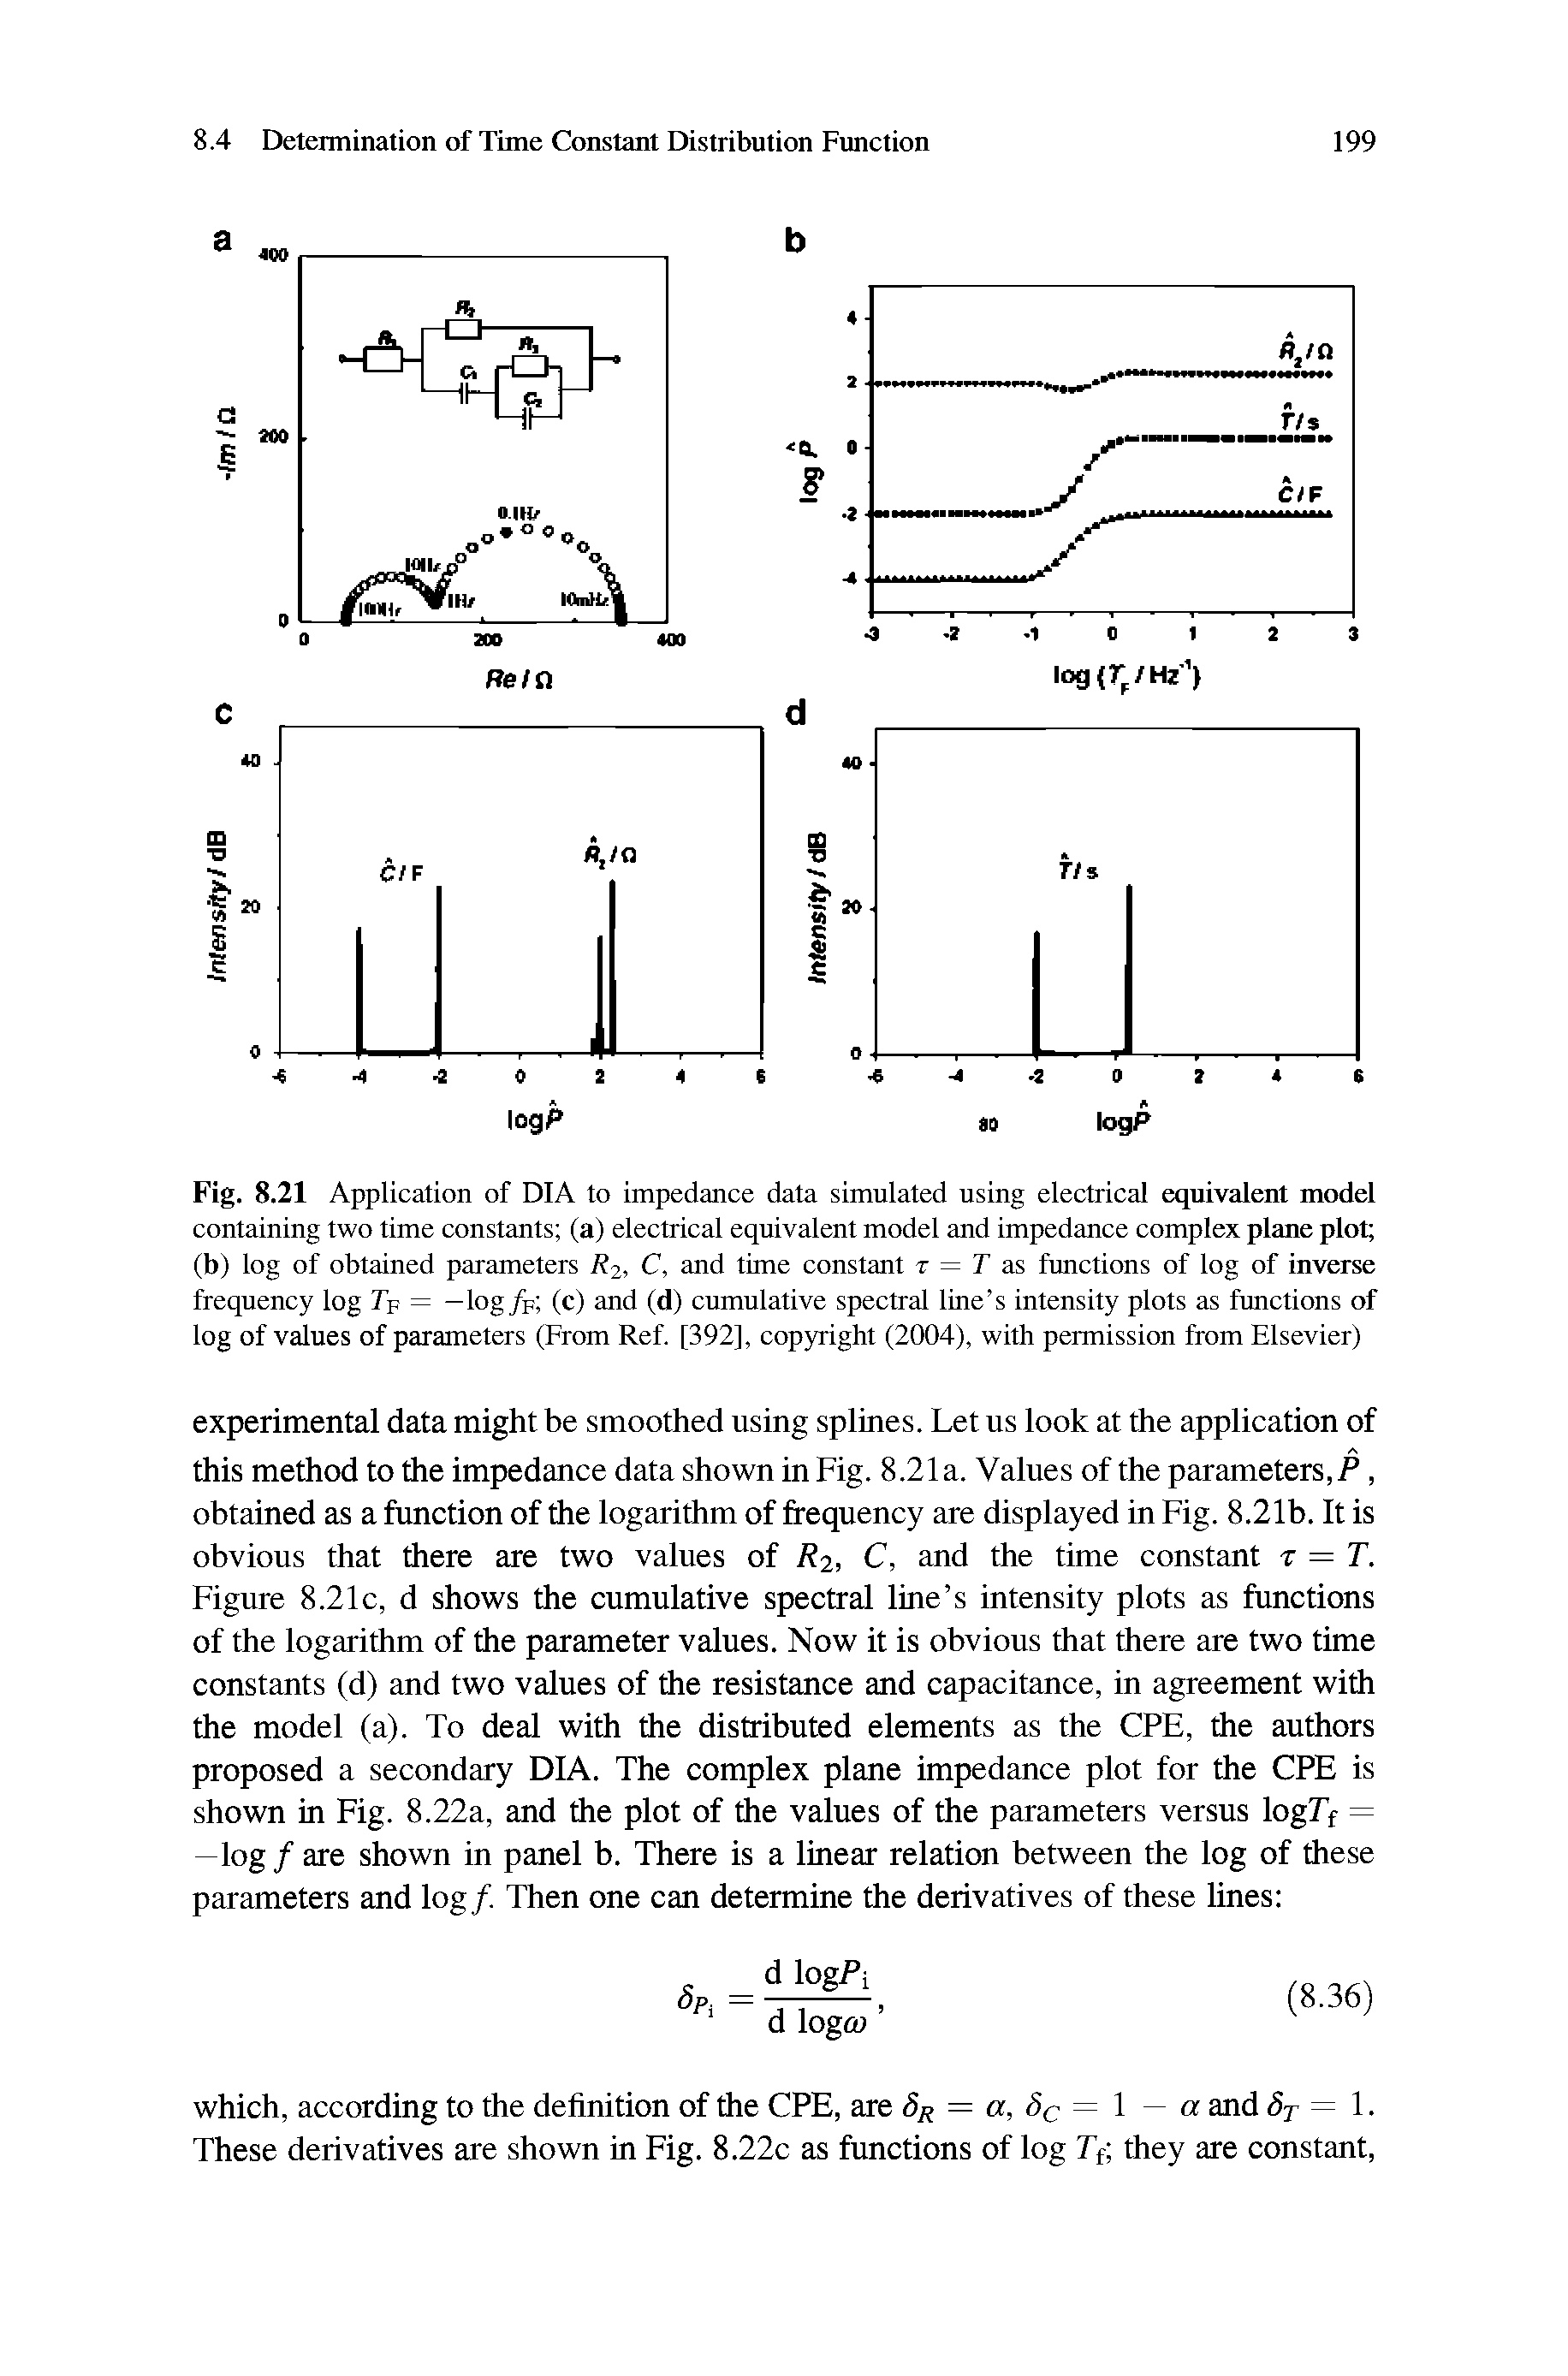 Fig. 8.21 Application of DIA to impedance data simulated using electrical equivalent model containing two time constants (a) electrical equivalent model and impedance complex plane plot (b) log of obtained parameters / 2, C, and time constant r = T as functions of log of inverse frequency log Tp = — log (c) and (d) cumulative spectral line s intensity plots as functions of log of values of parameters (From Ref. [392], copyright (2004), with permission from Elsevier)...